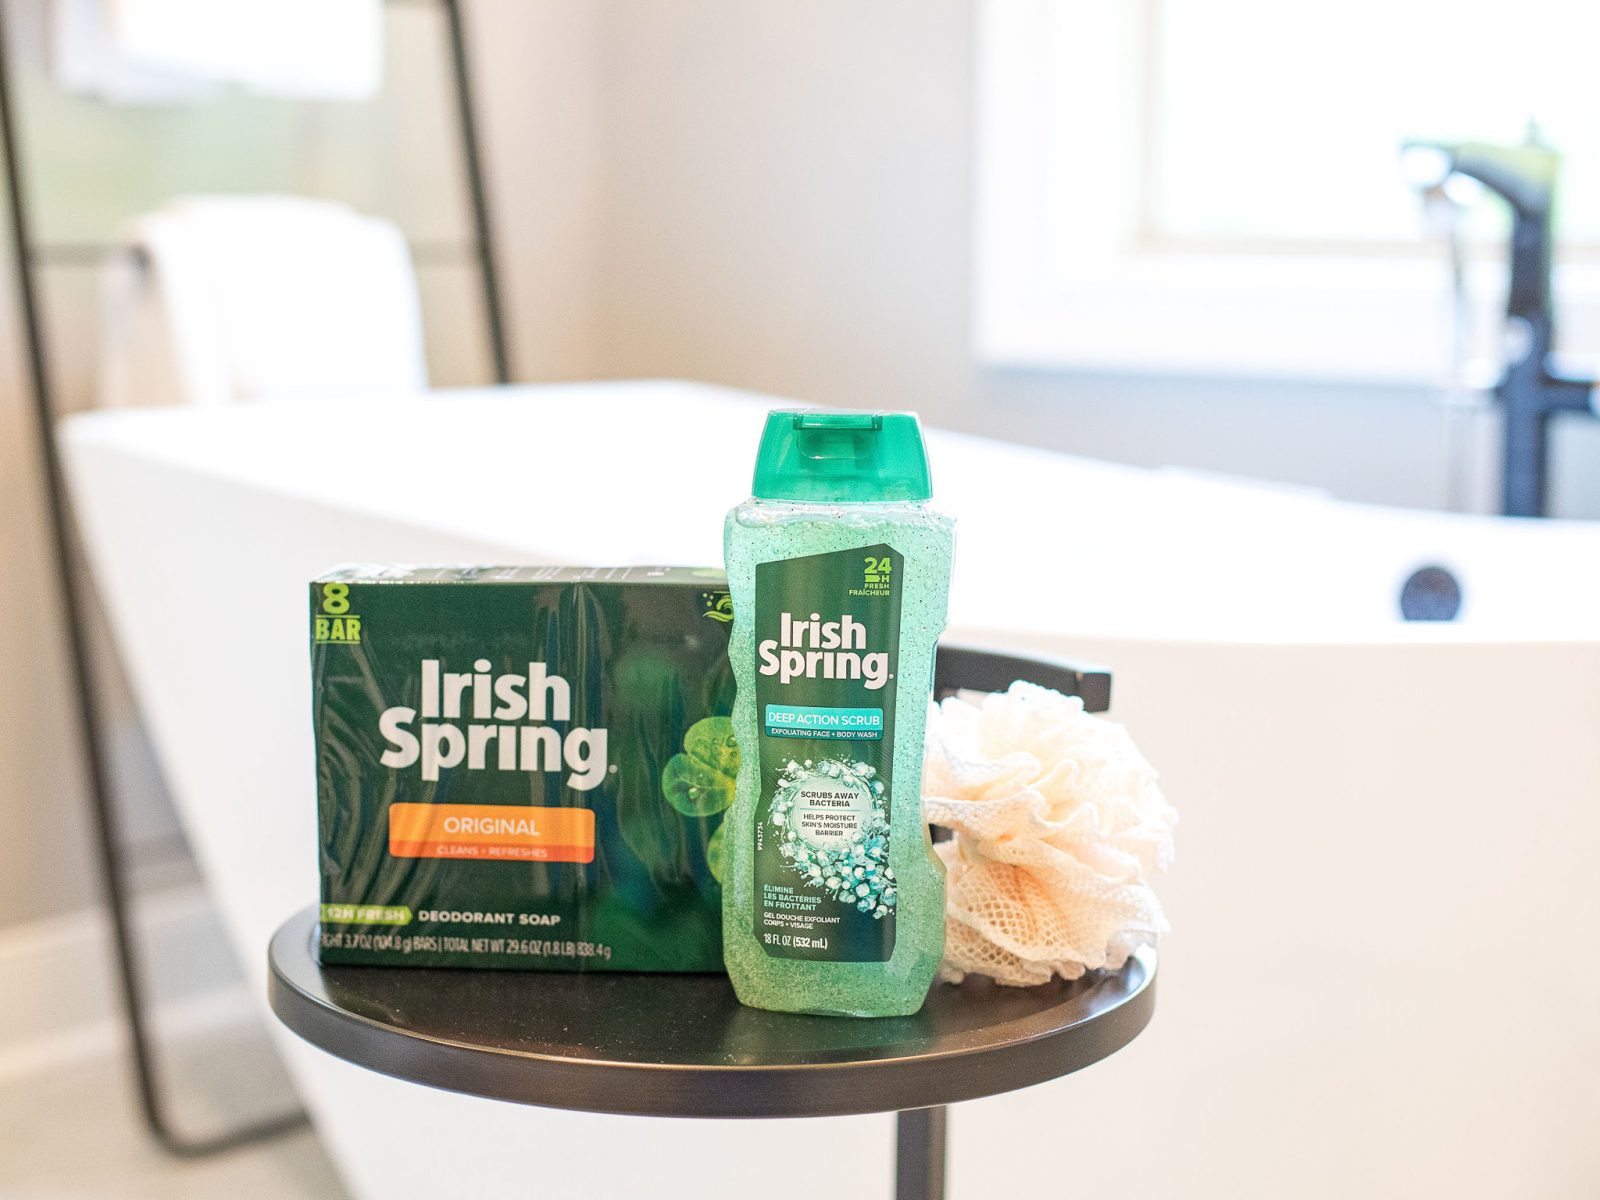 Irish Spring Coupons For The Publix Sale - Body Wash or 8pk Bar Soap Just $3 (Regular Price $4.29) on I Heart Publix